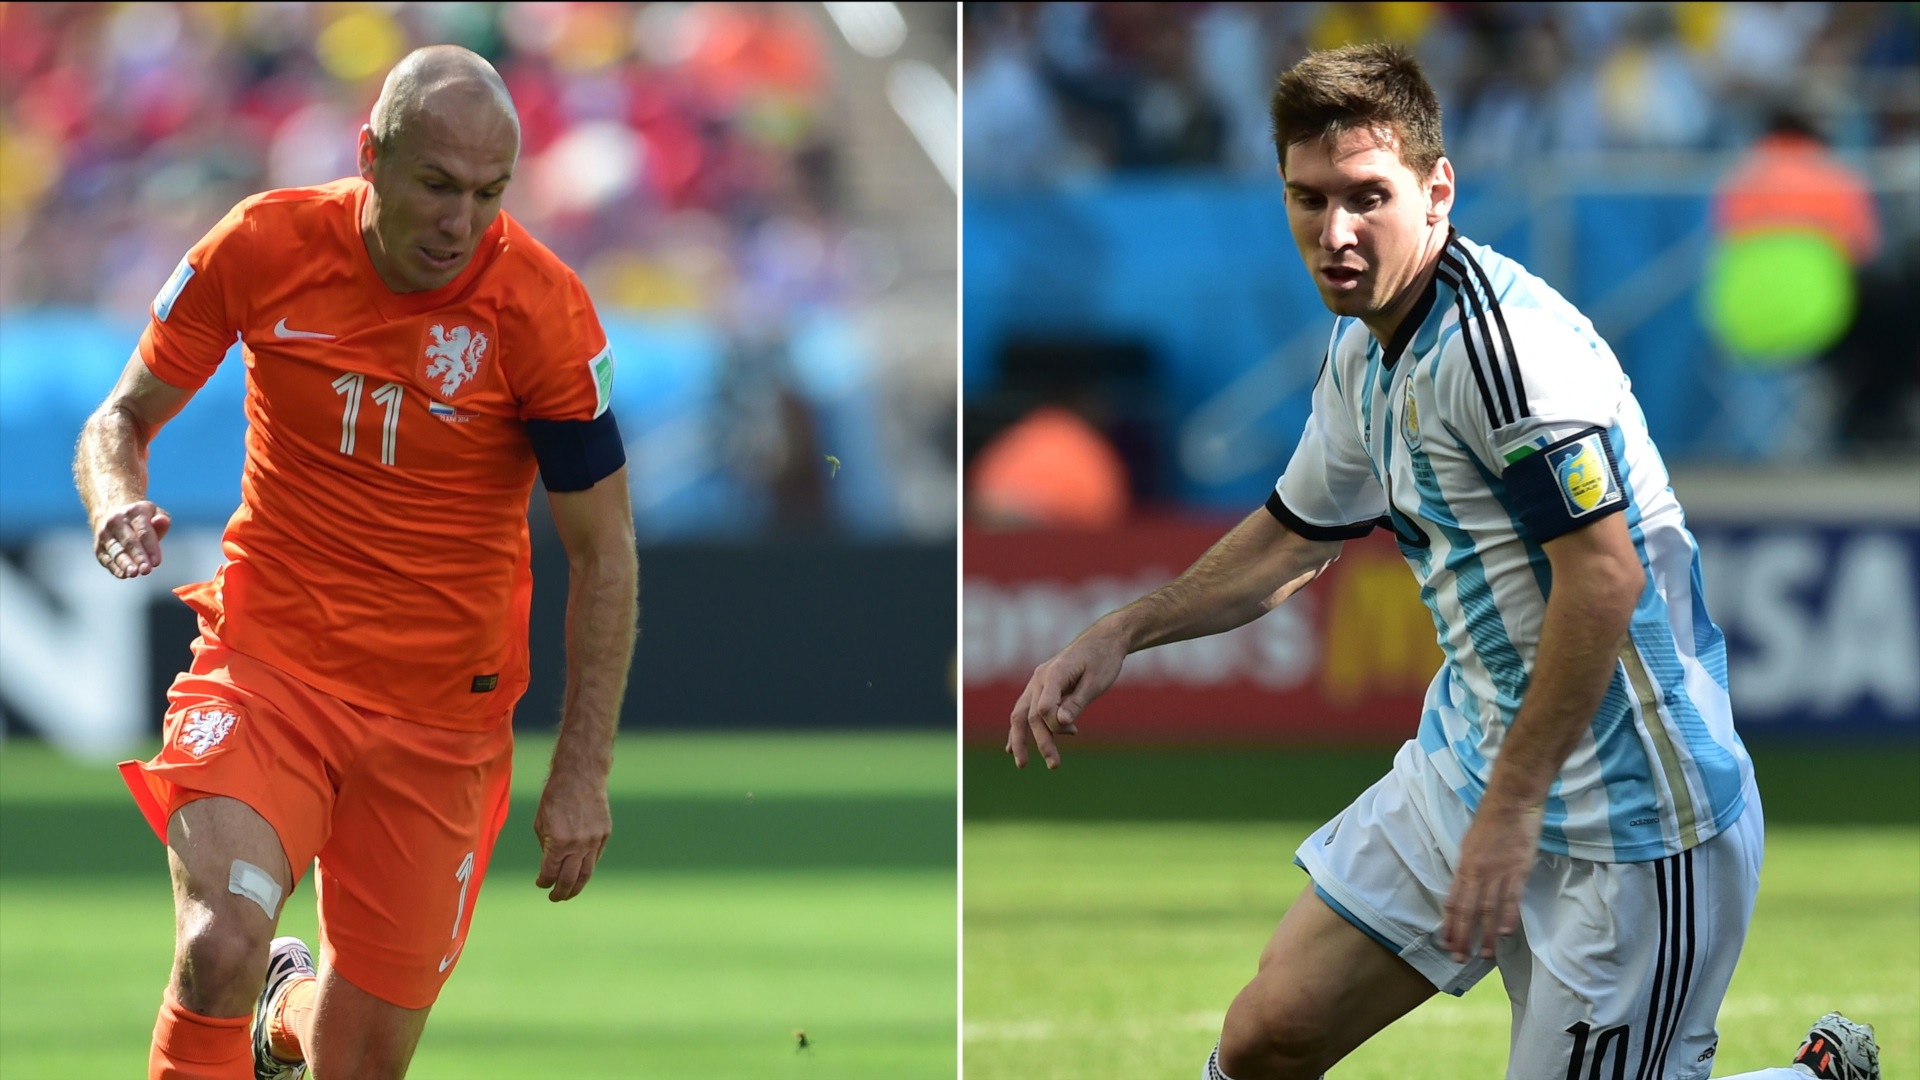 Netherlands wears black hat into World Cup semifinal vs